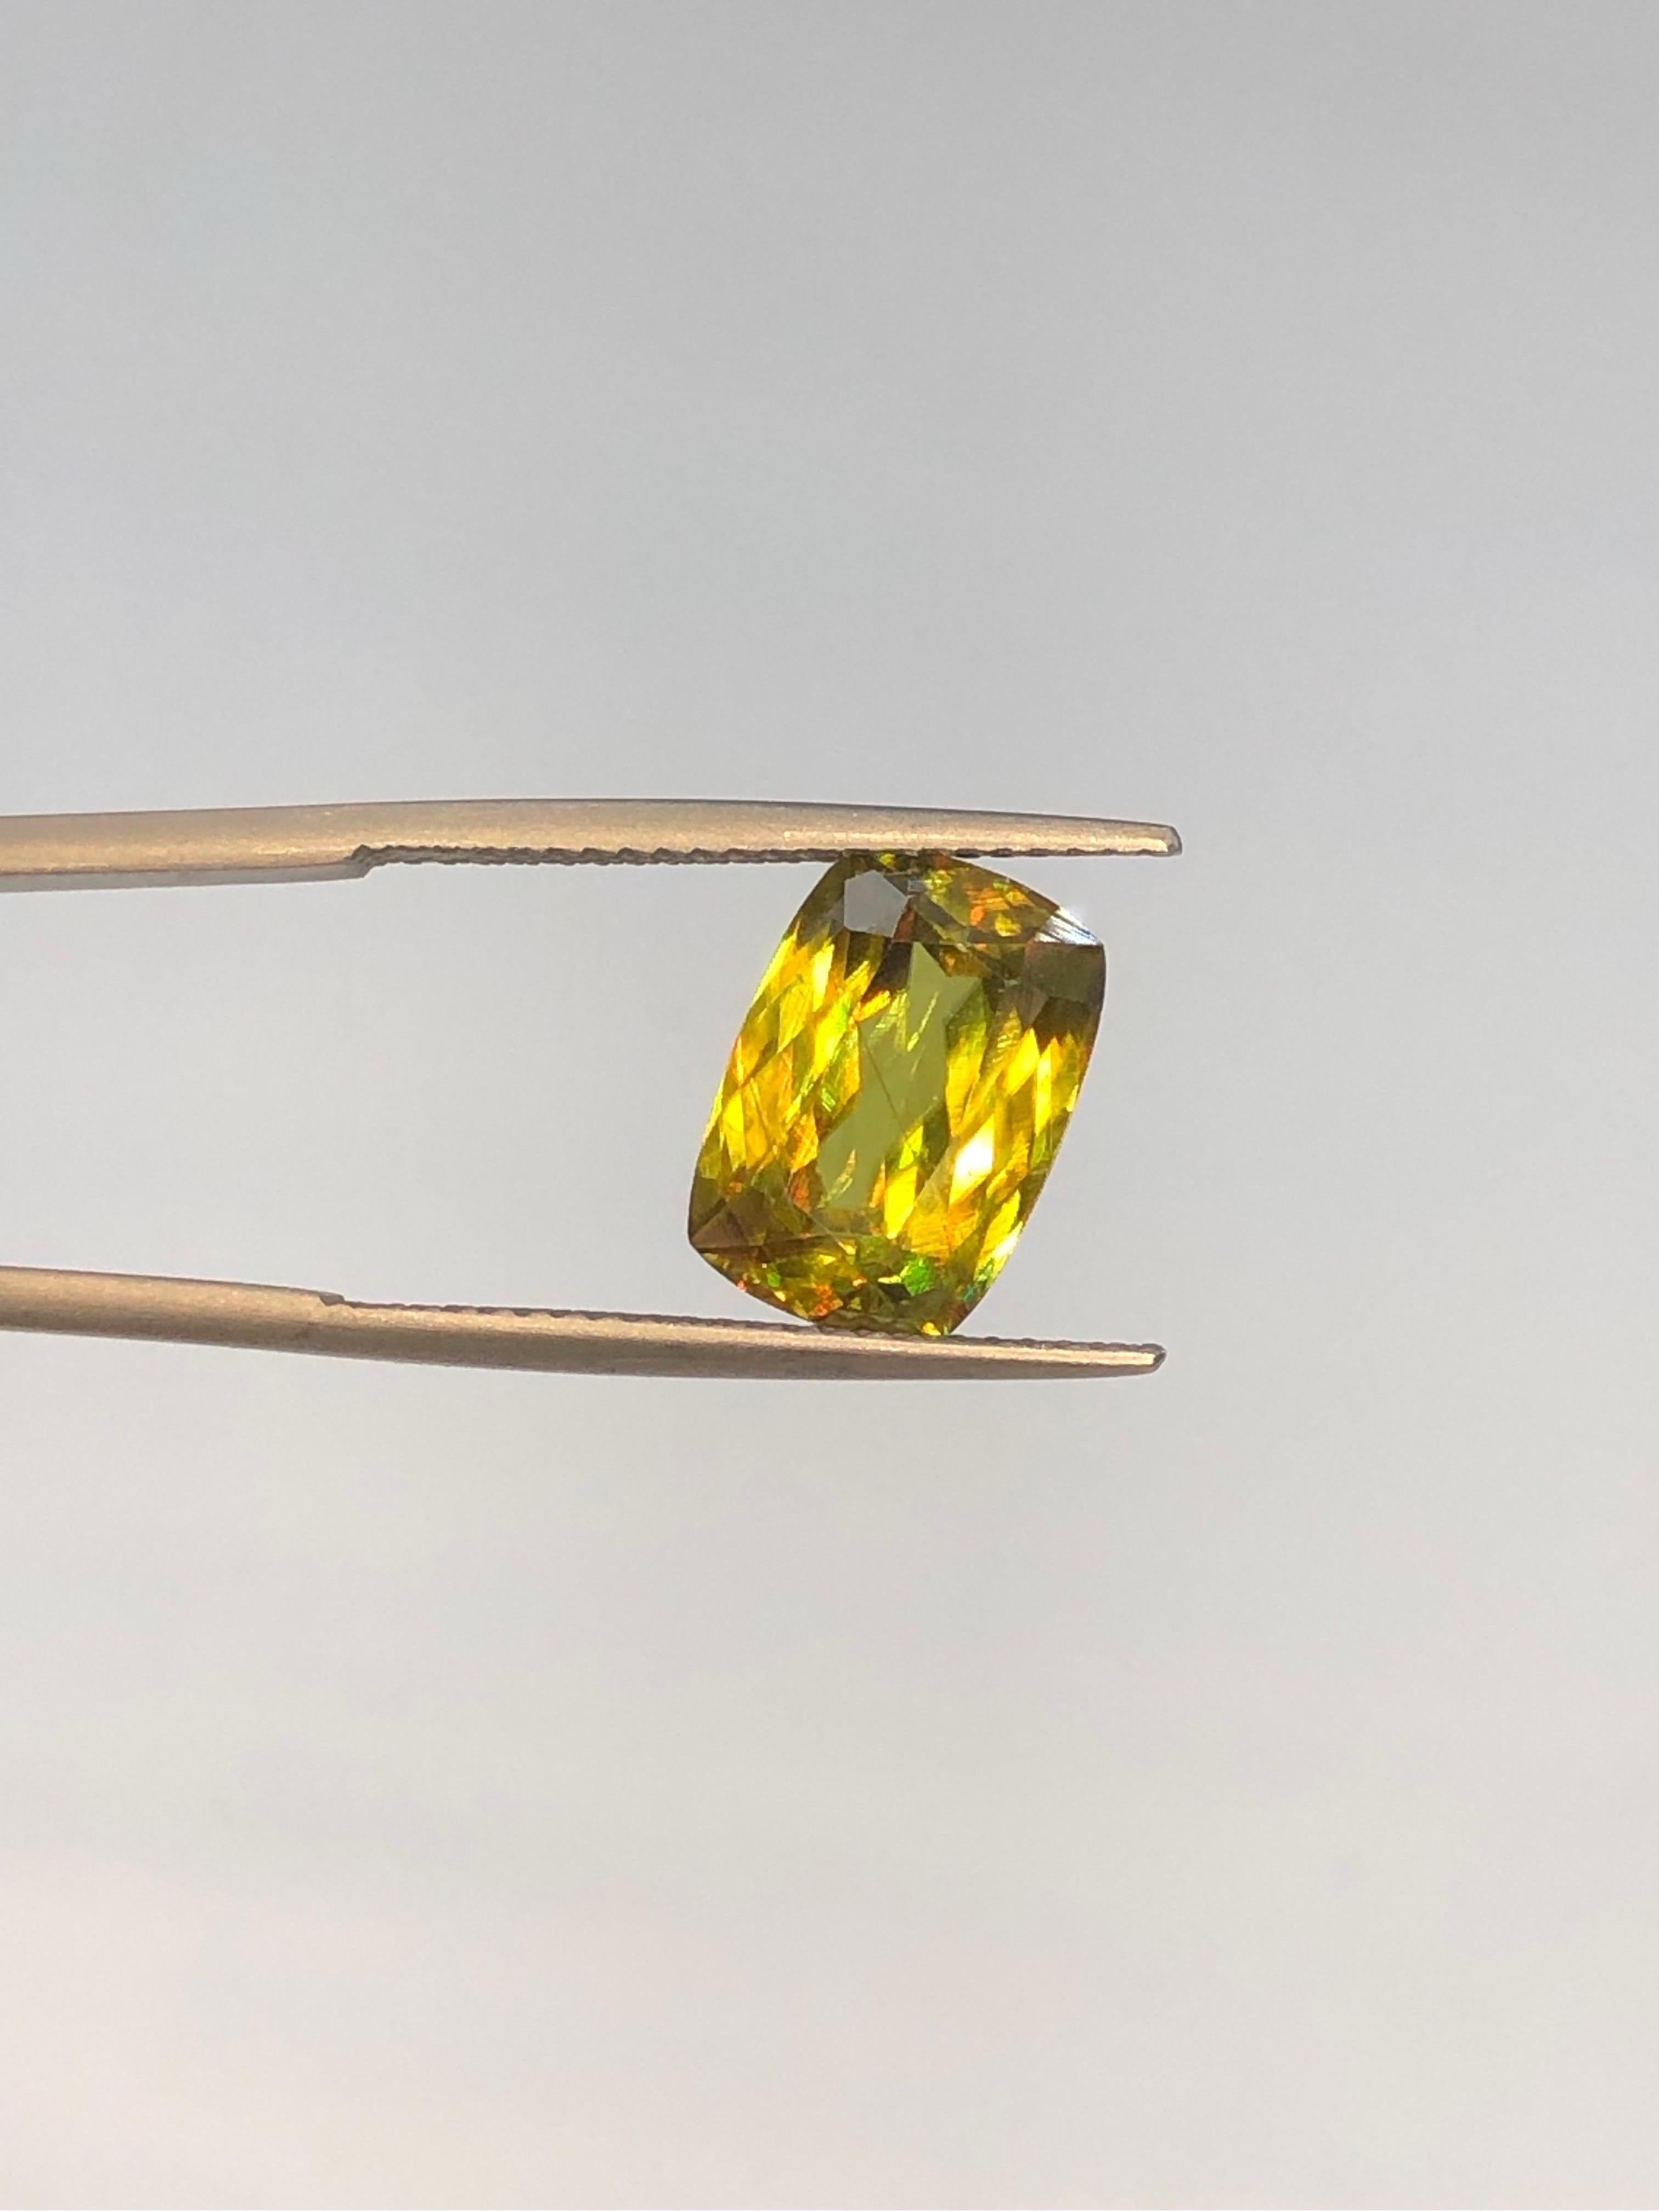 Introducing a dazzling 4.60 ct Sphene gemstone from Madagascar, boasting a mesmerizing greenish-yellow hue. With SI clarity, it showcases vibrant sparks of yellow, green, and orange, making it a captivating addition to any collection or jewelry